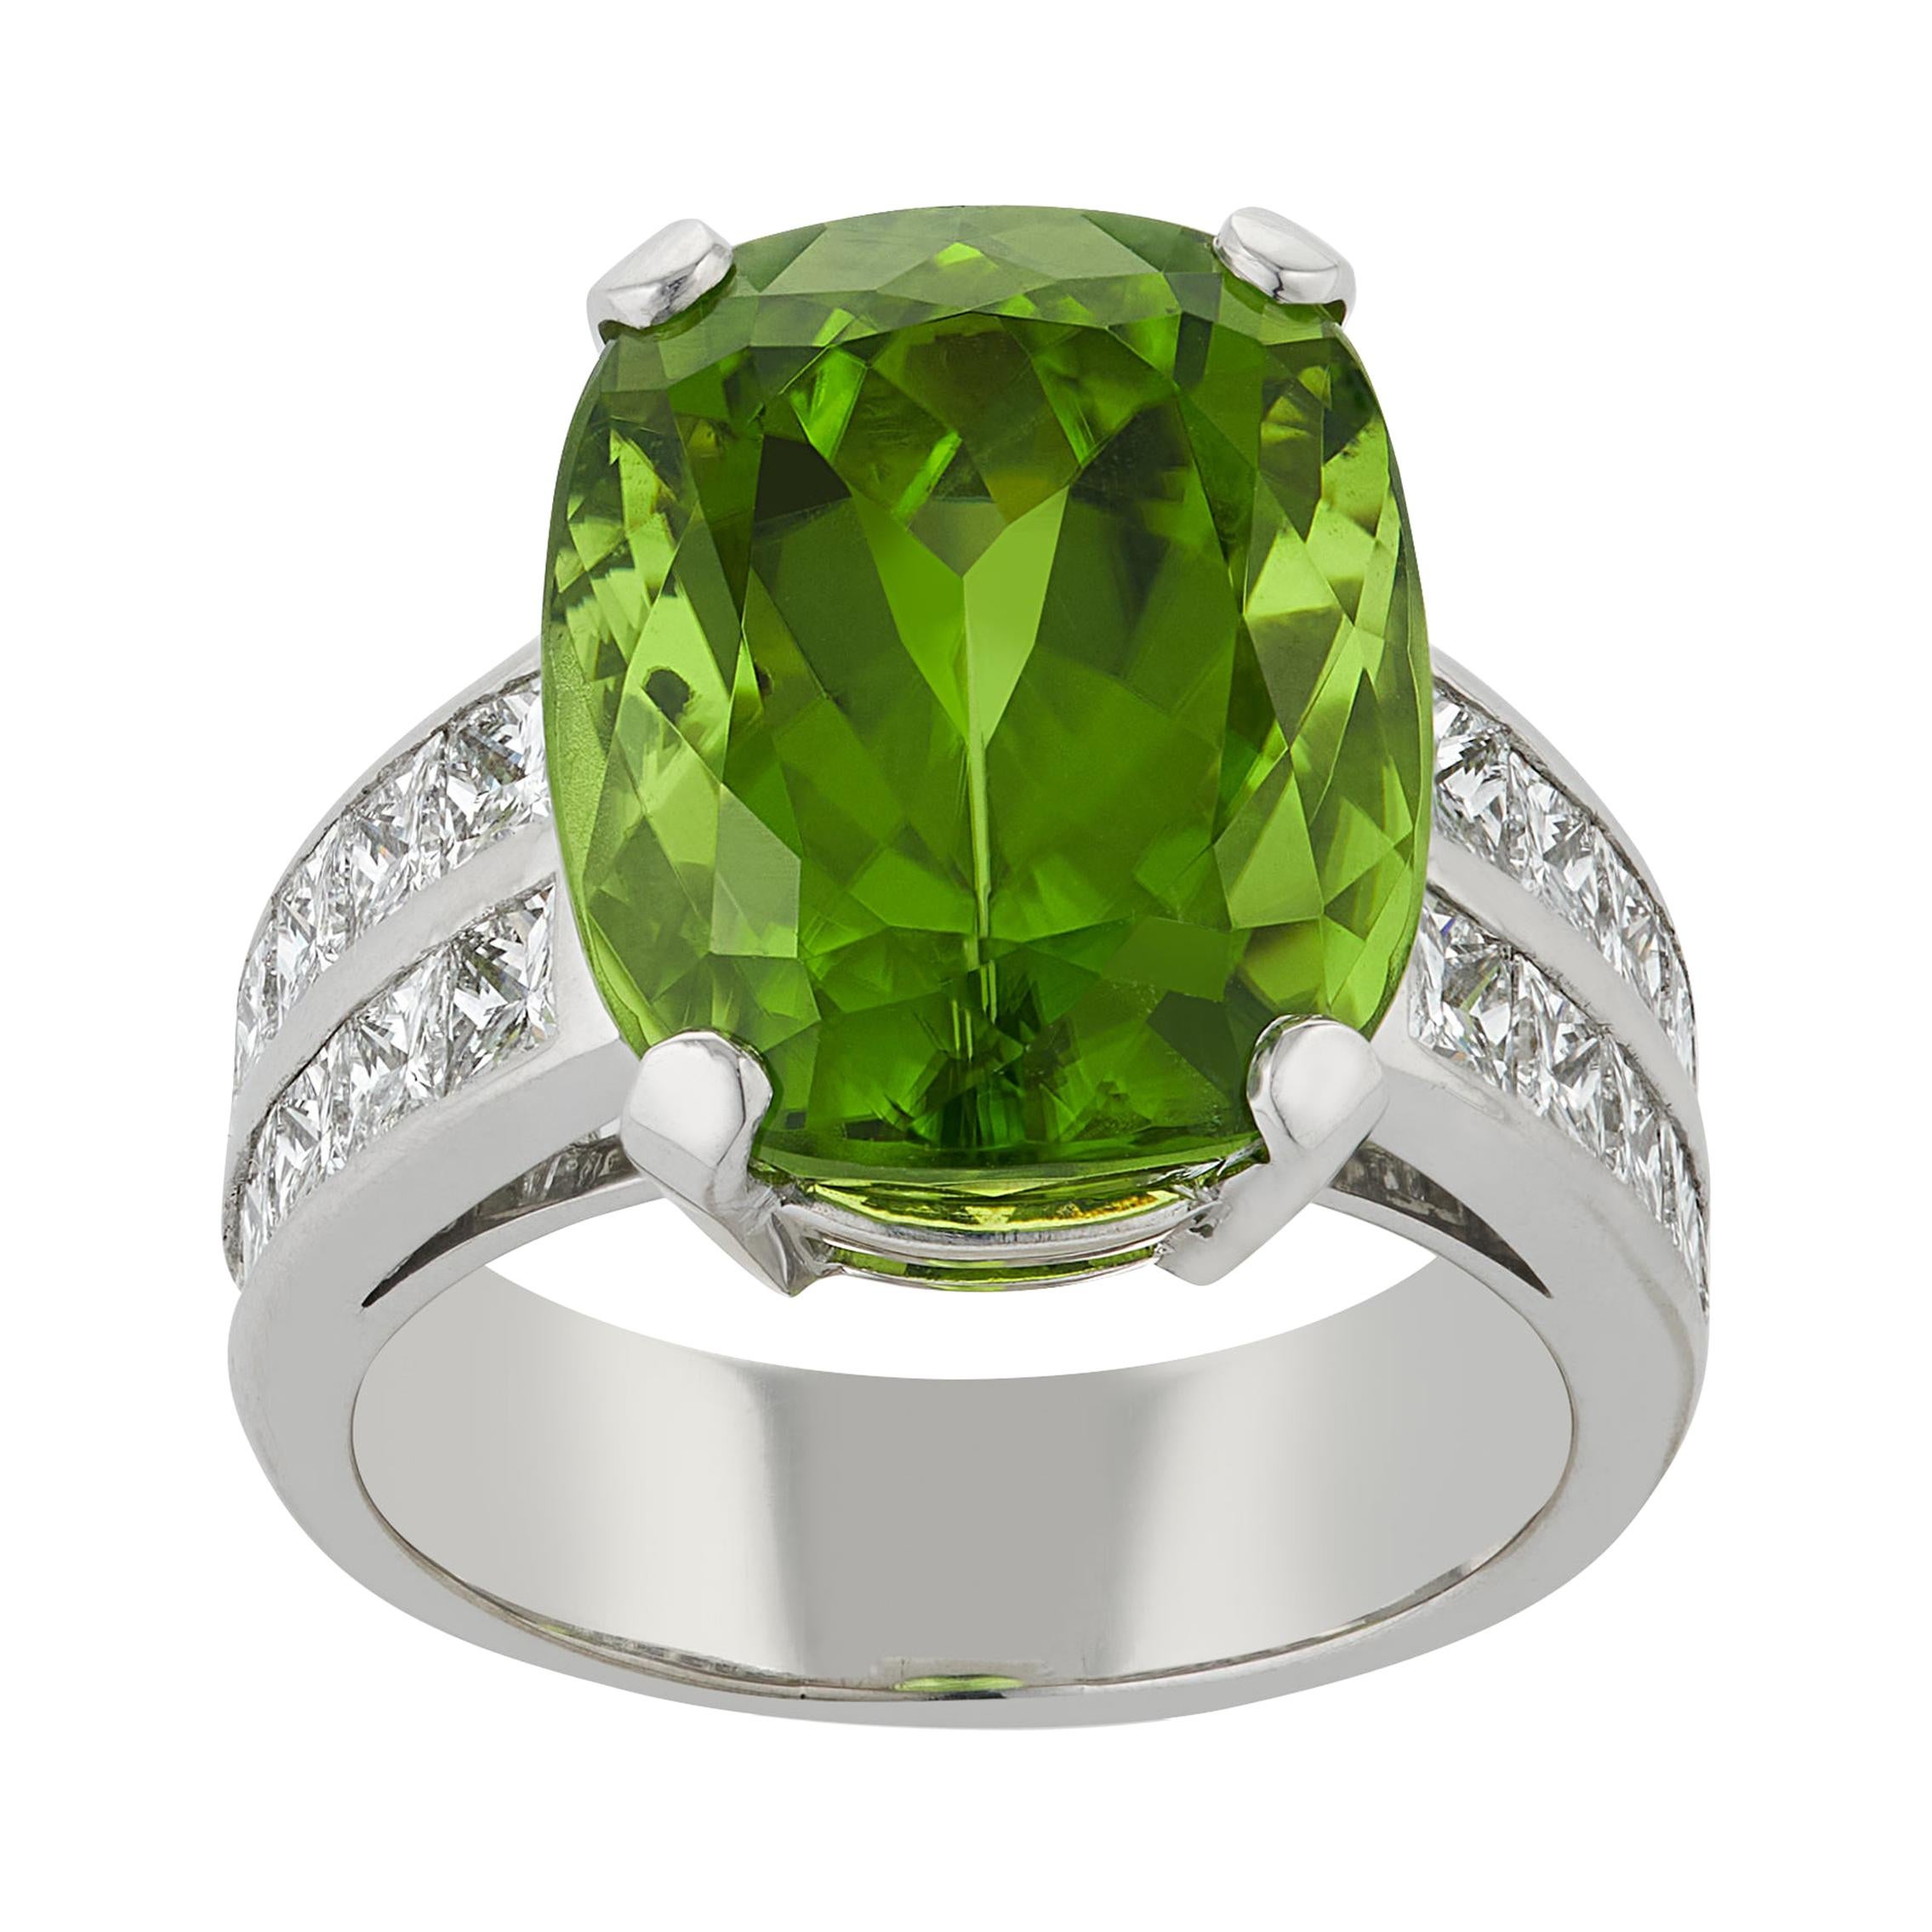 E Wolfe & Co Handmade 18ct White Gold Peridot and Diamond Cocktail Ring